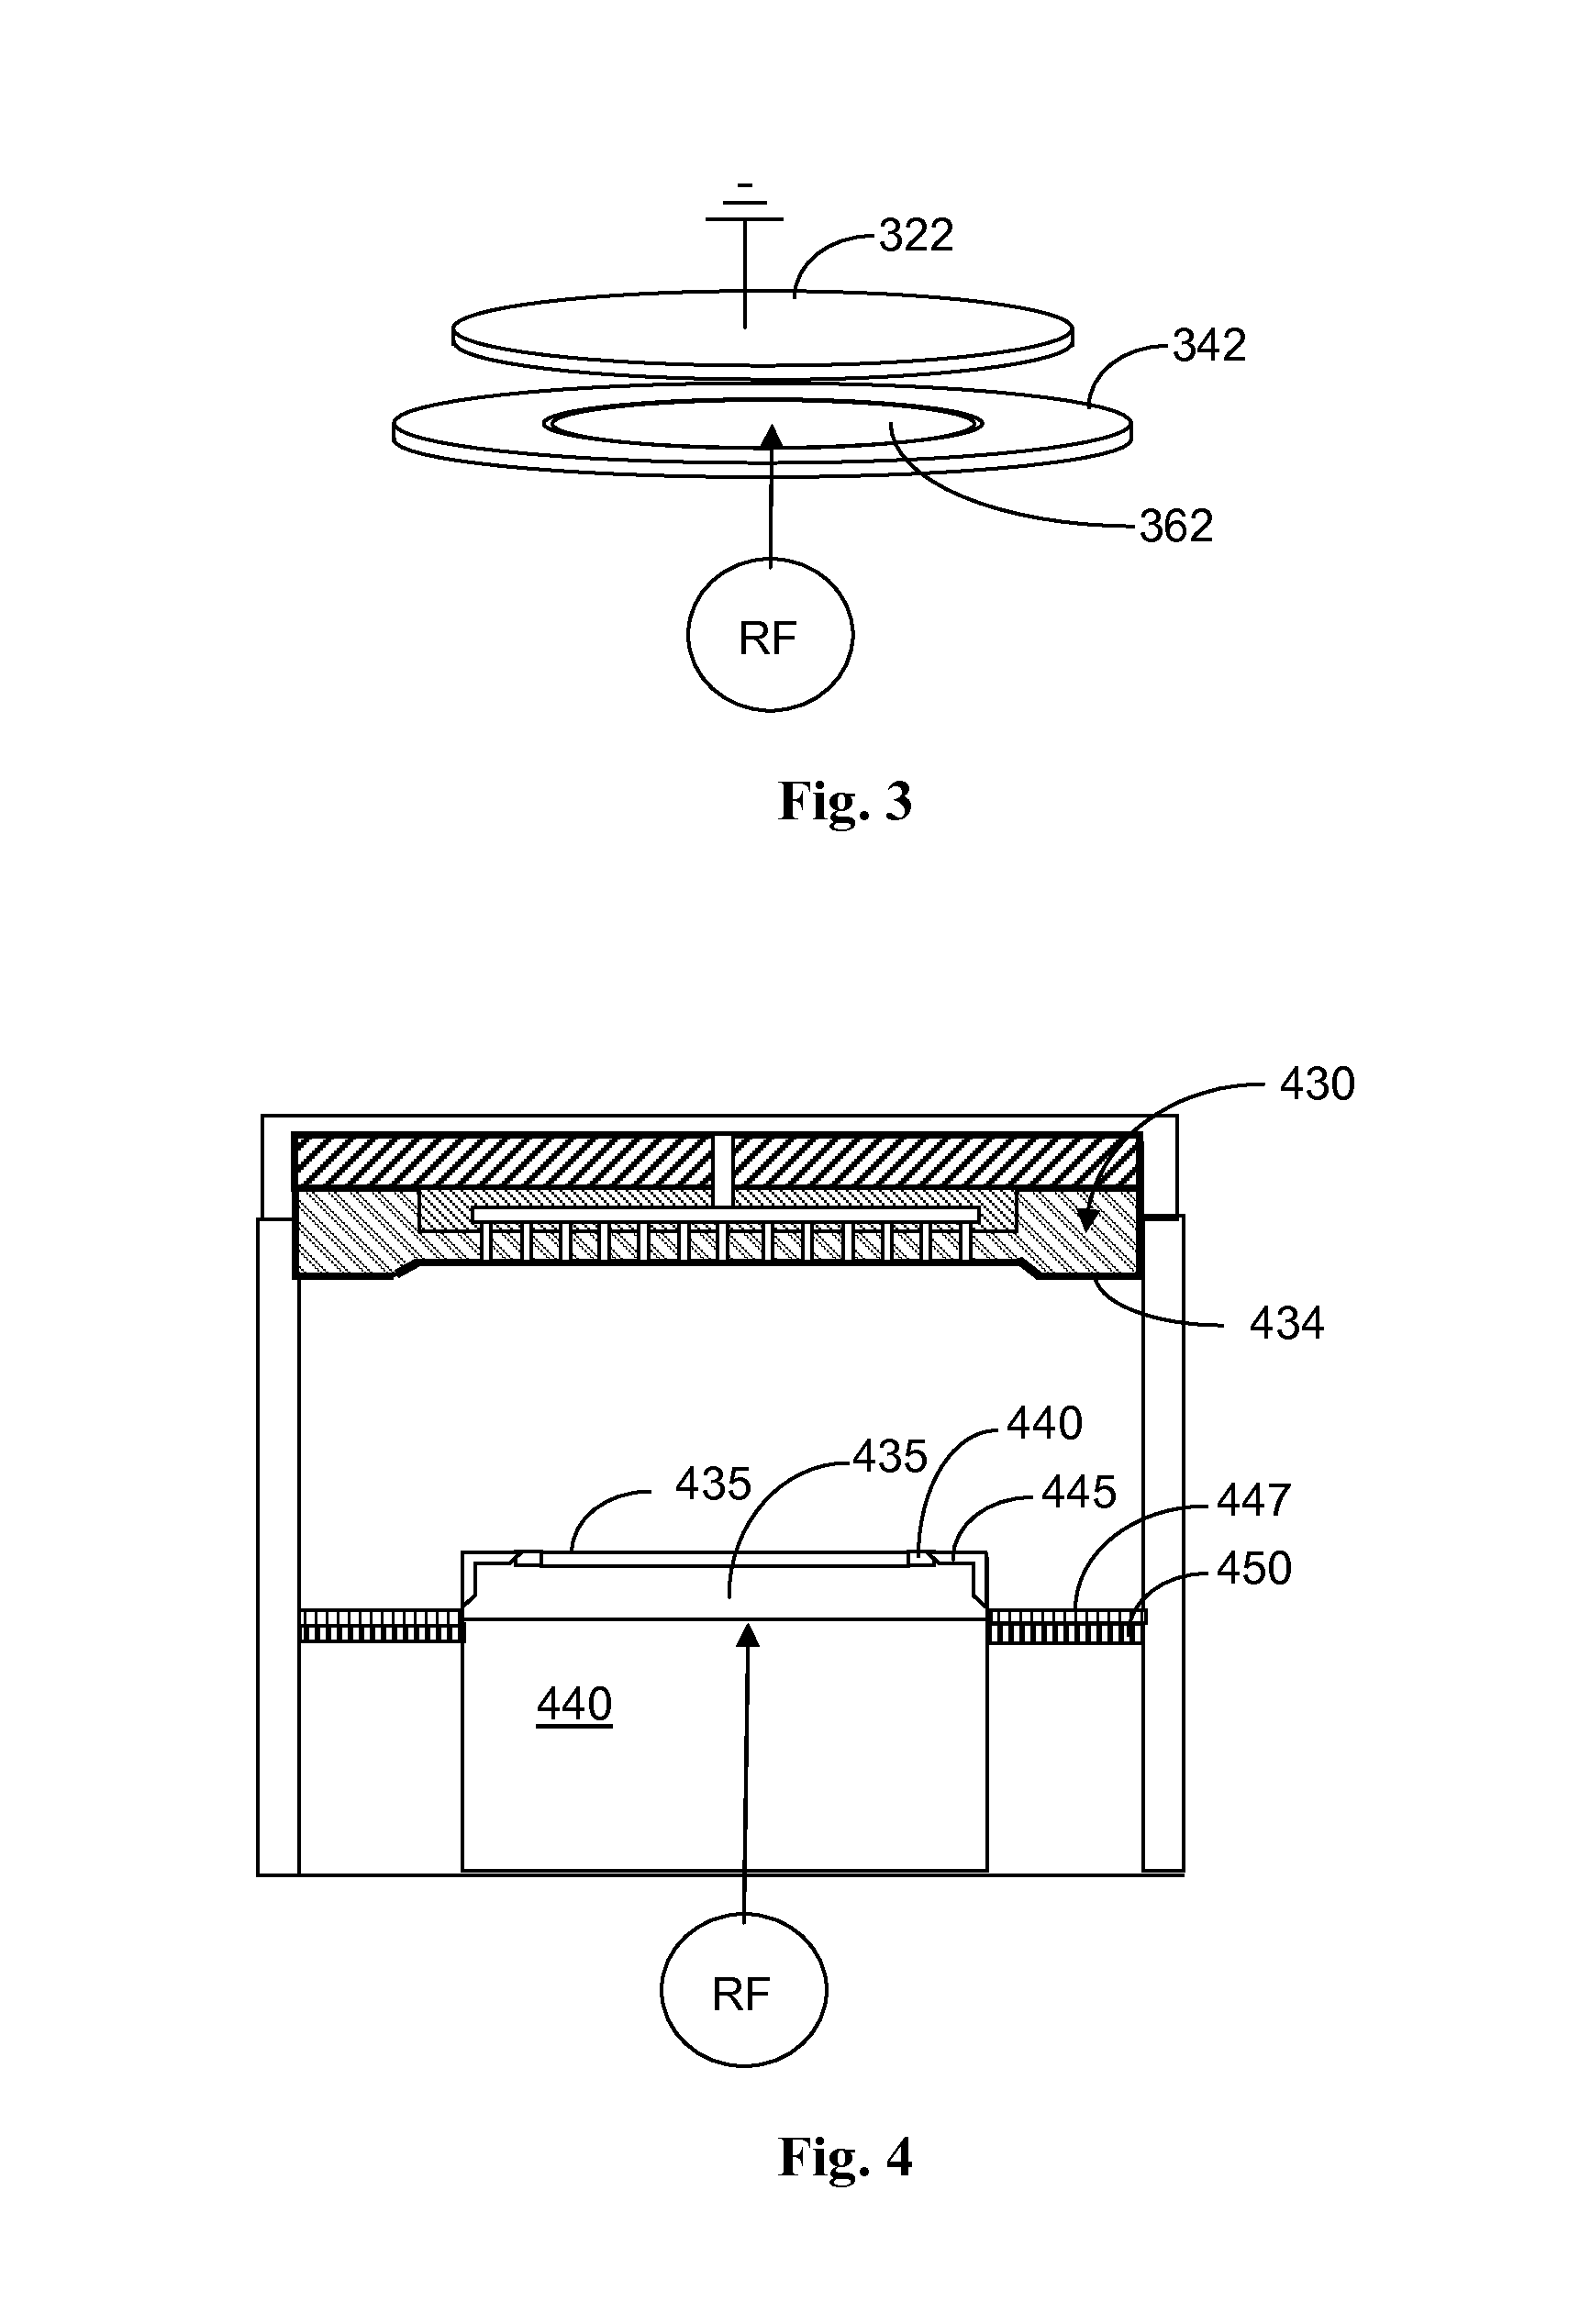 Coating for performance enhancement of semiconductor apparatus